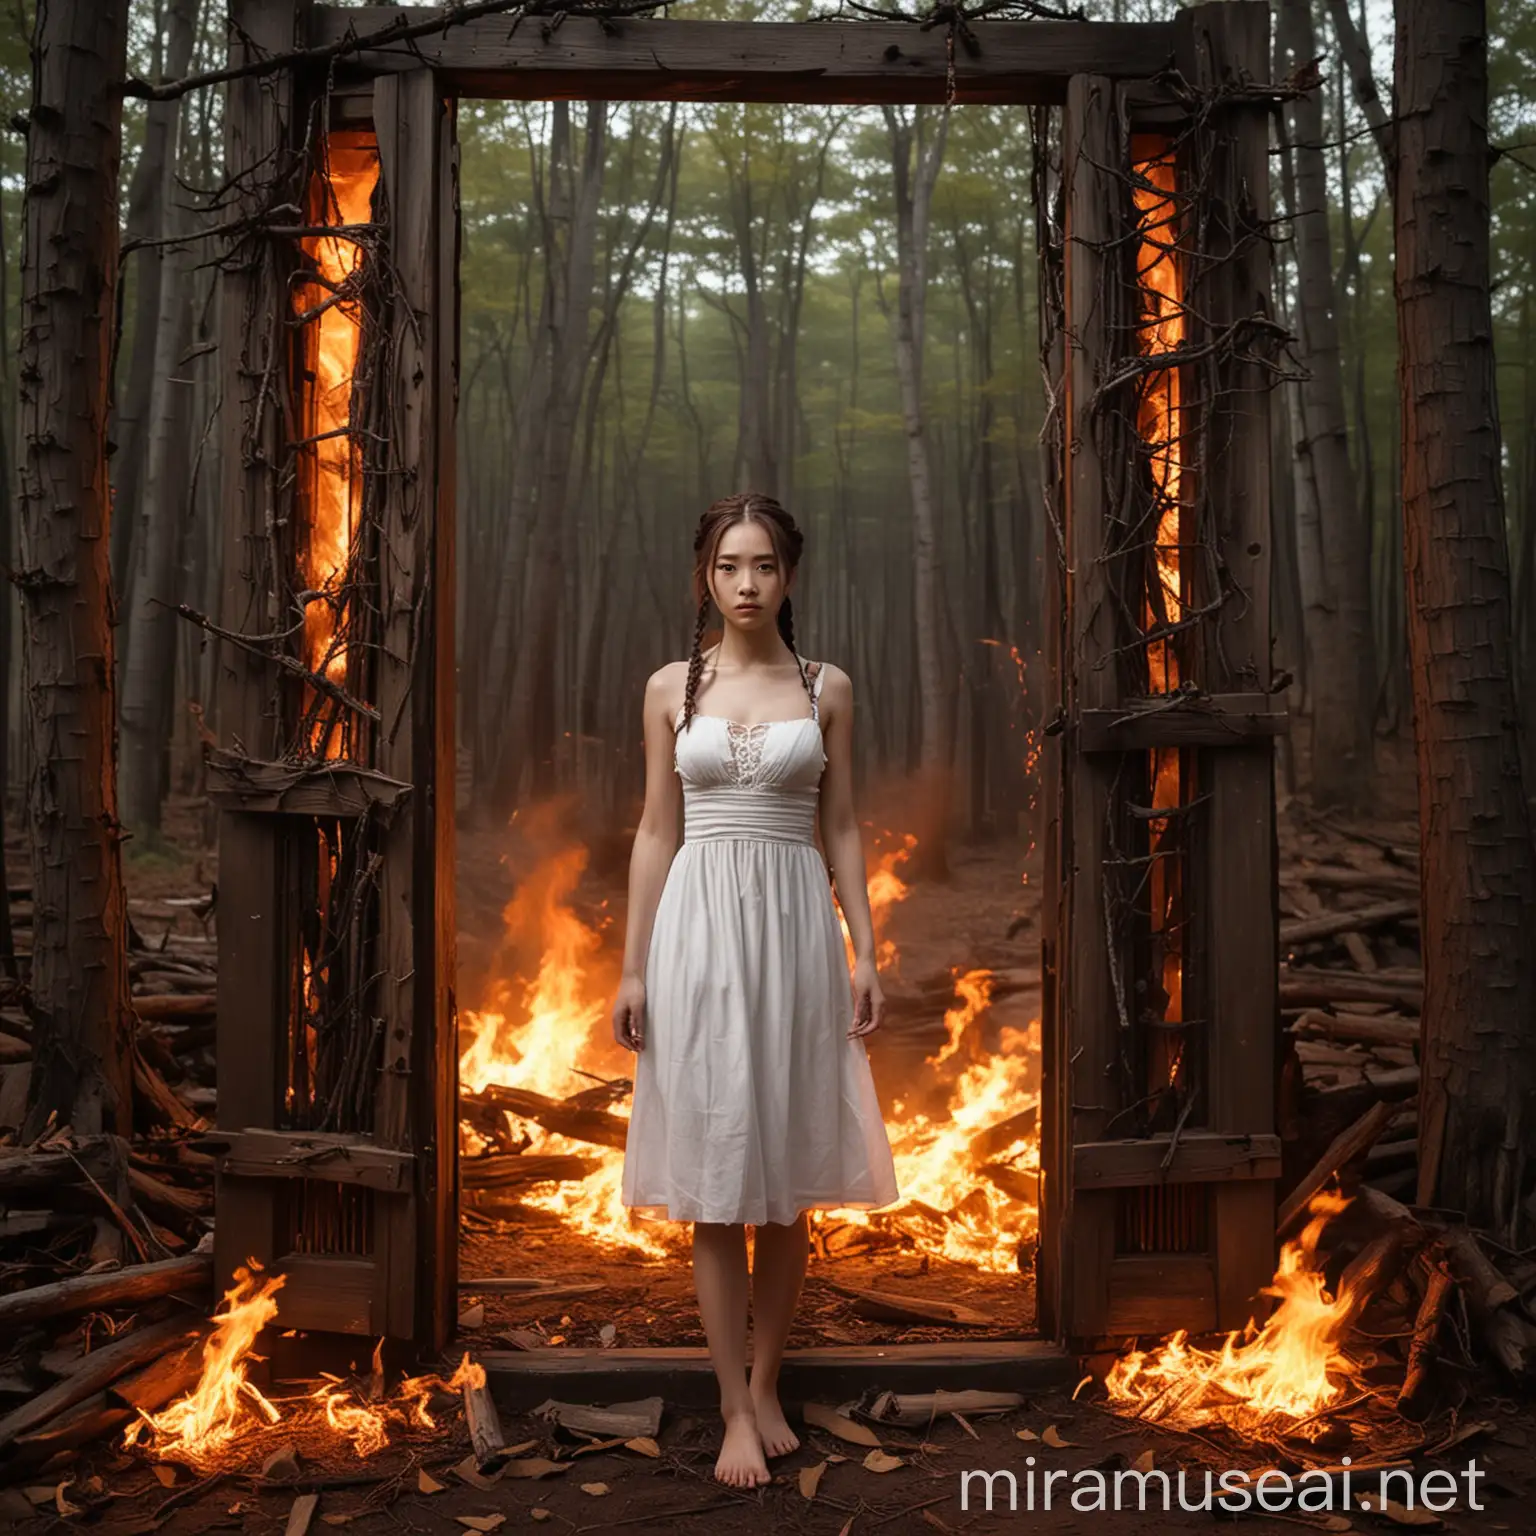 Mystical Korean Woman Stands Before Engulfed Wooden Door in Fiery Forest